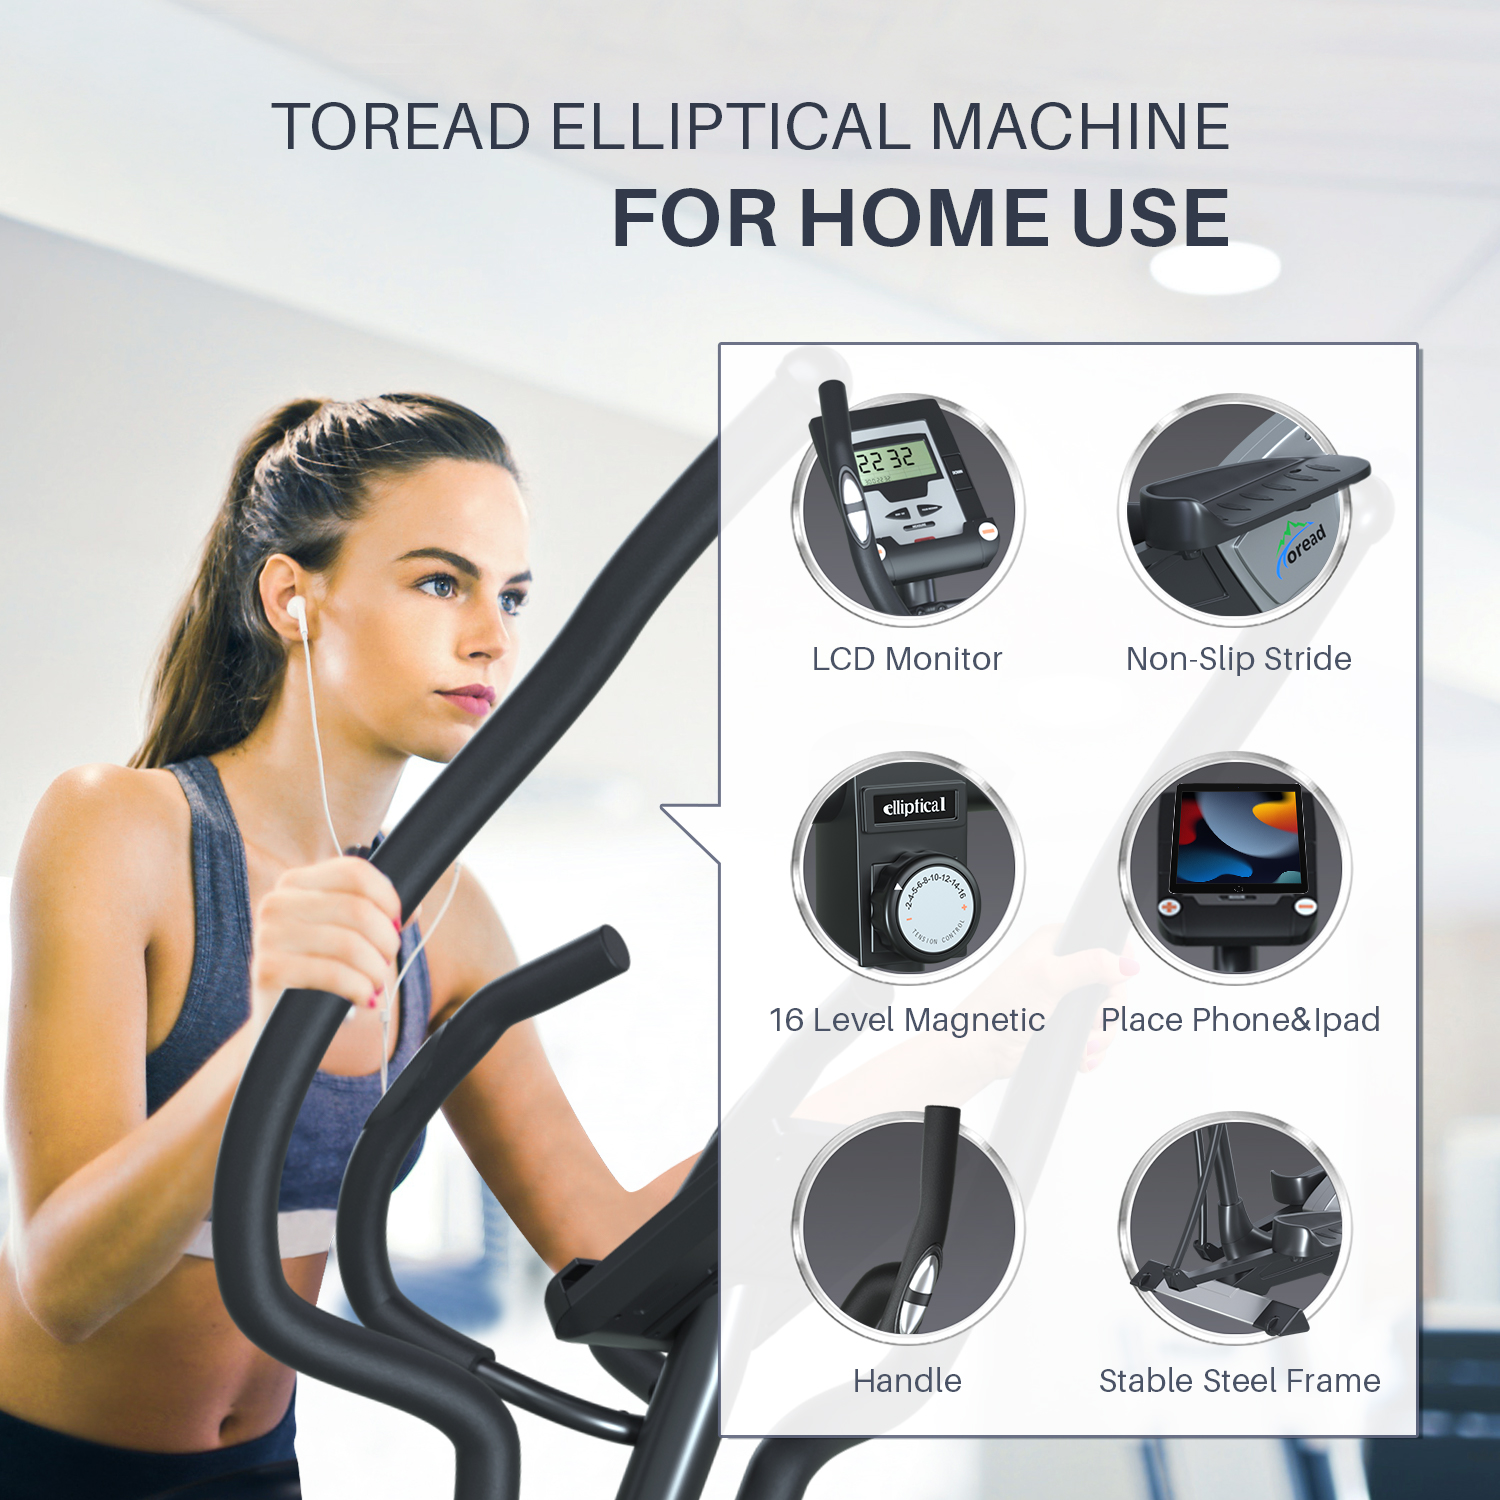 TOREAD Elliptical Machine, HOME EXERCISE Trainer with Magnetic Driving  System,LCD Monitor, 8LB Flywheel, Adjustable 16 Resistance Levels, 350LB  Weight Capacity FITNESS TRAINER